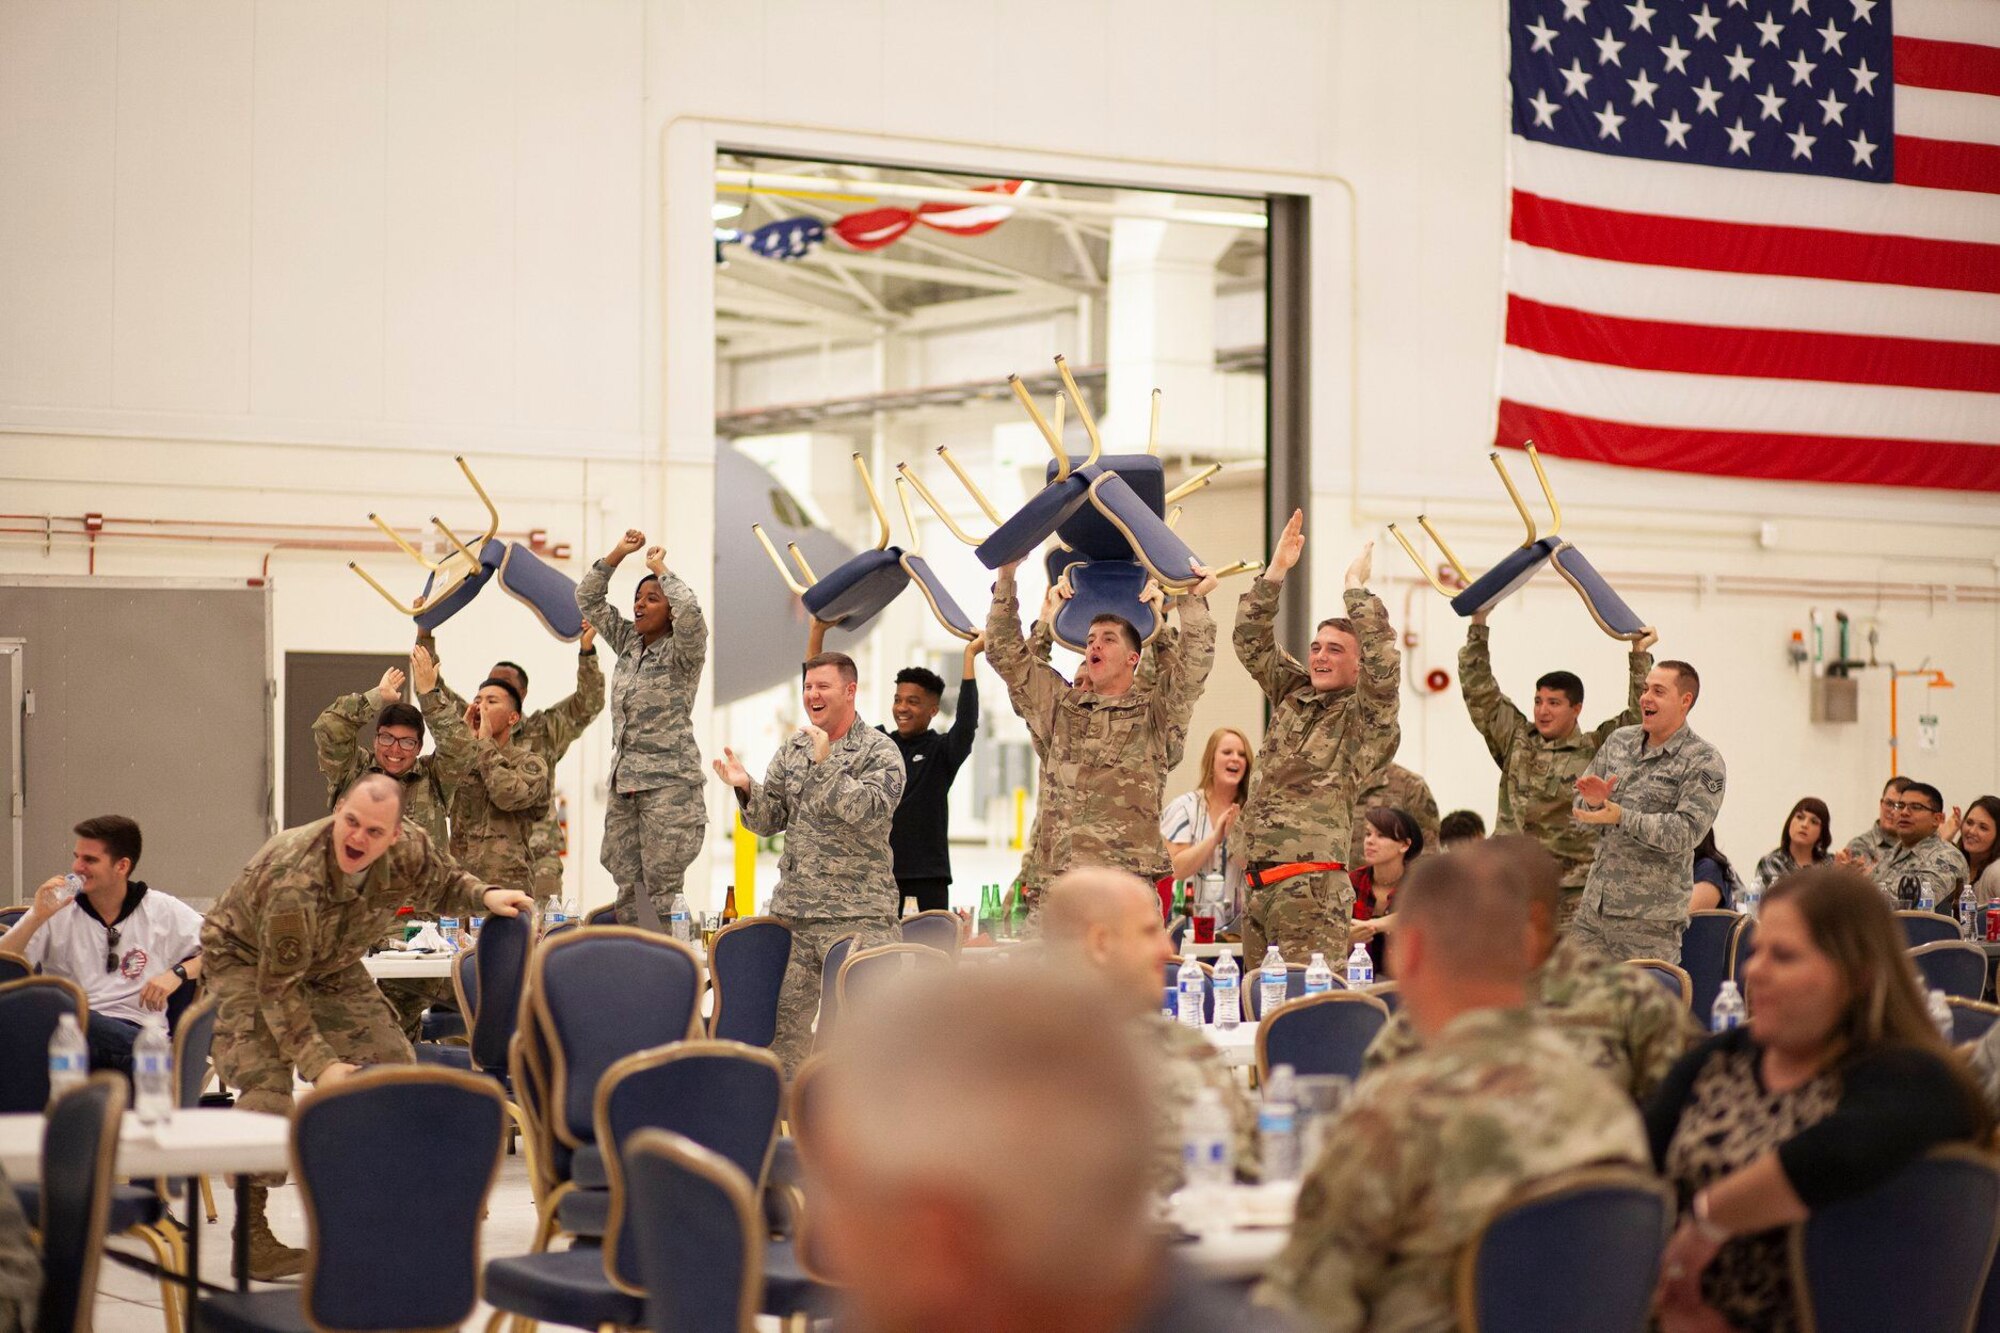 A group of maintainers from the 22nd Maintenance Squadron, celebrate as a fellow Airman receives an award during the Knucklebuster’s Award Ceremony Oct. 5, 2019, at McConnell Air Force Base, Kan. A total of 35 awards were given during the banquet.  (U.S. Air Force photo by 2nd Lt. Kaitlyn Danner)